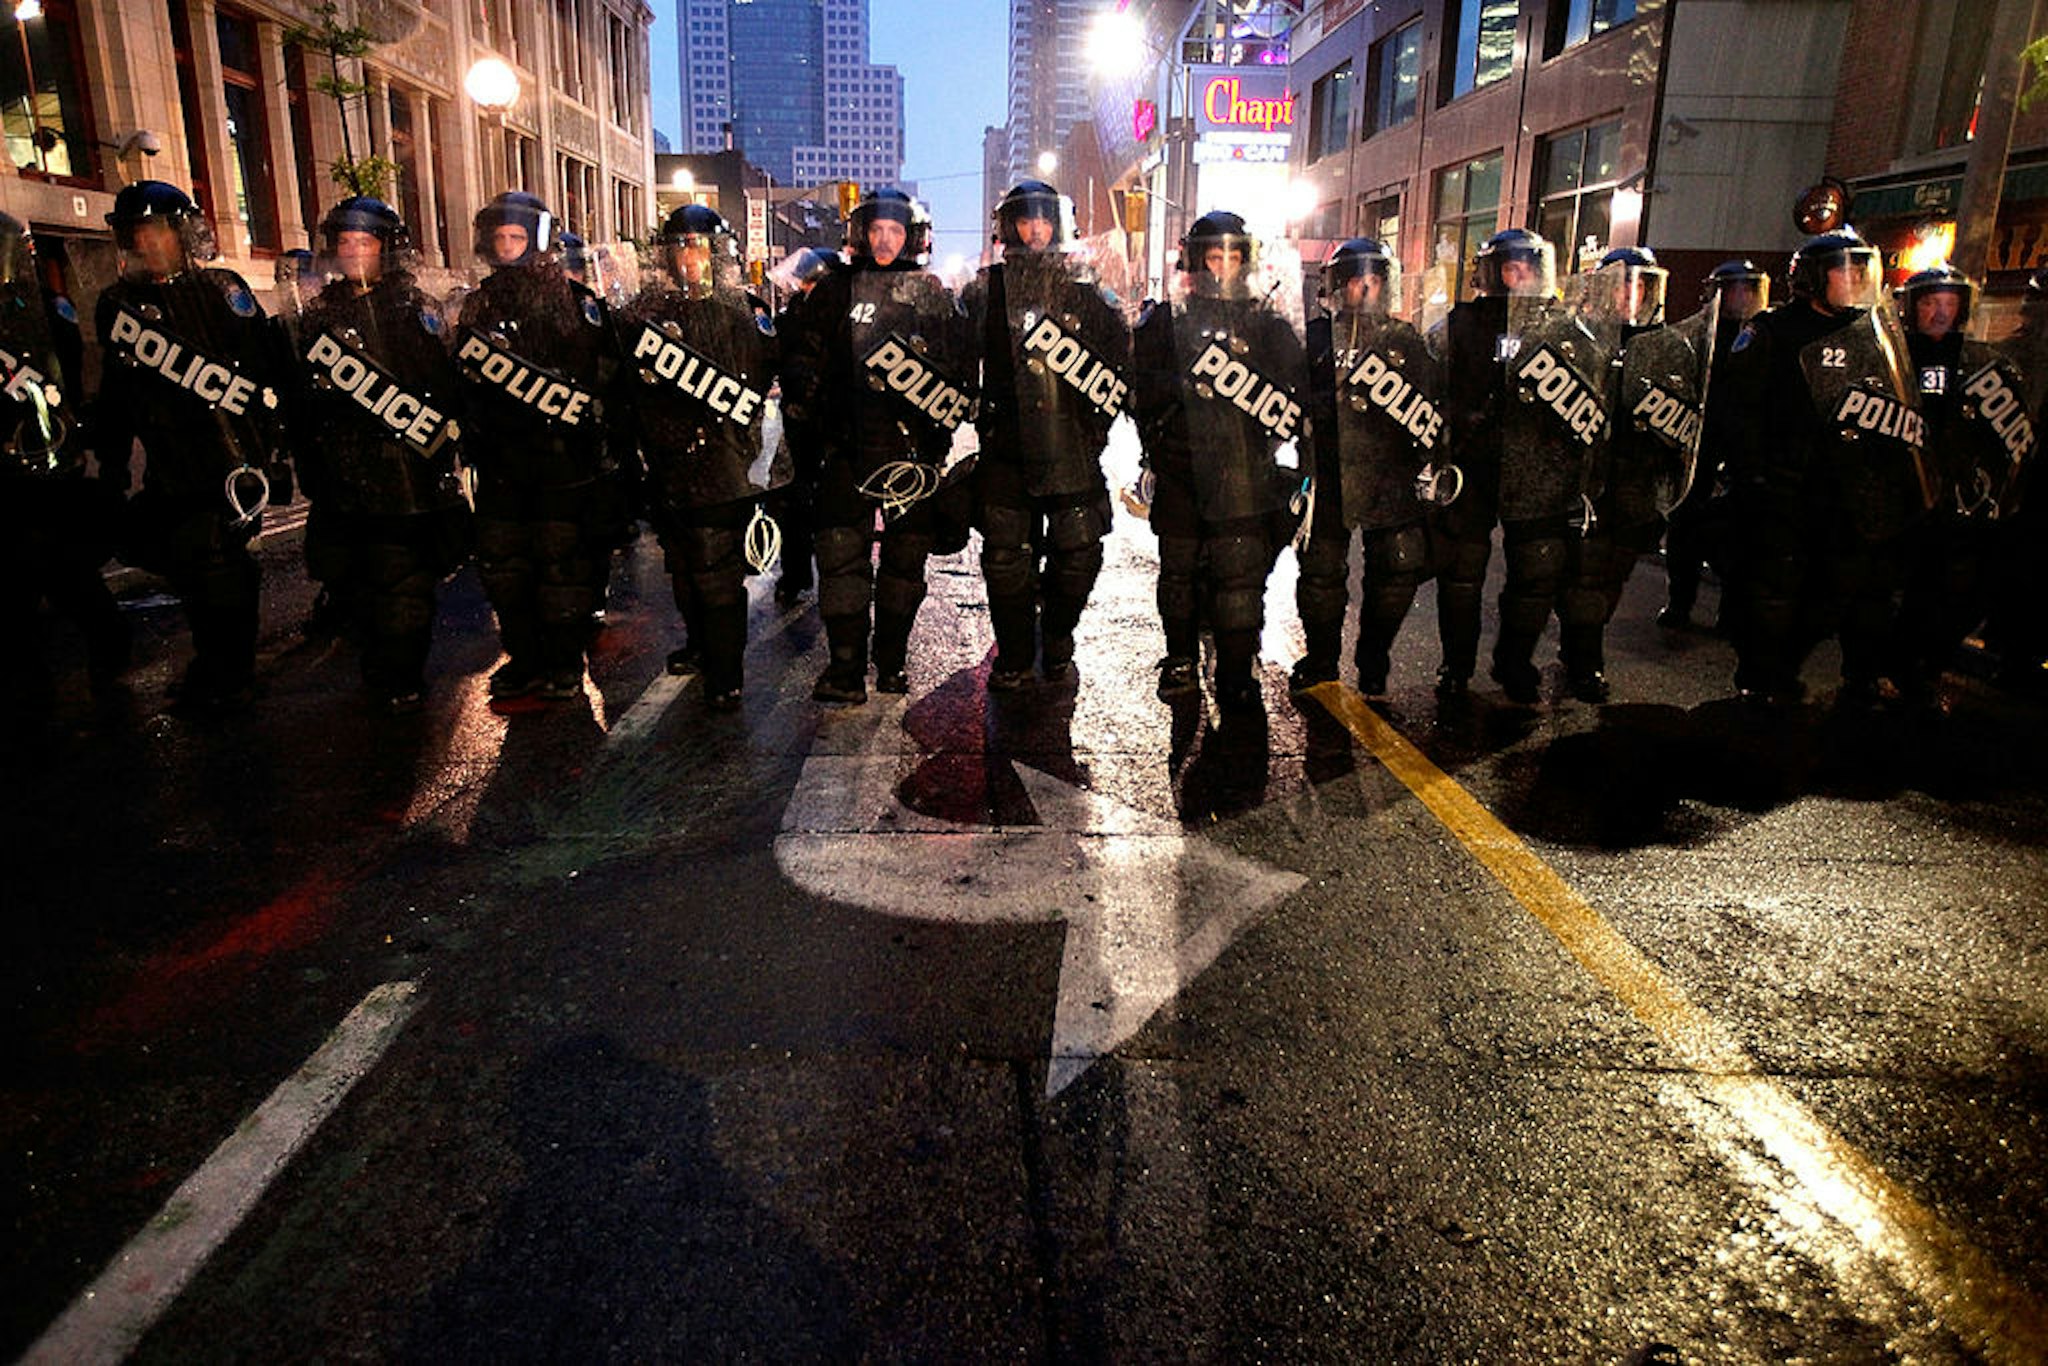 TORONTO, ON - JUNE 26: Police officers in full riot gear advance on anti-G20 demonstrators on Queen Street June 26, 2010 in Toronto, Canada. Earlier in the day violent protesters burned police cars, smashed shop fronts and confronted the force of approximately 20,000 police charged with keeping order during the first day of the G20 Summit